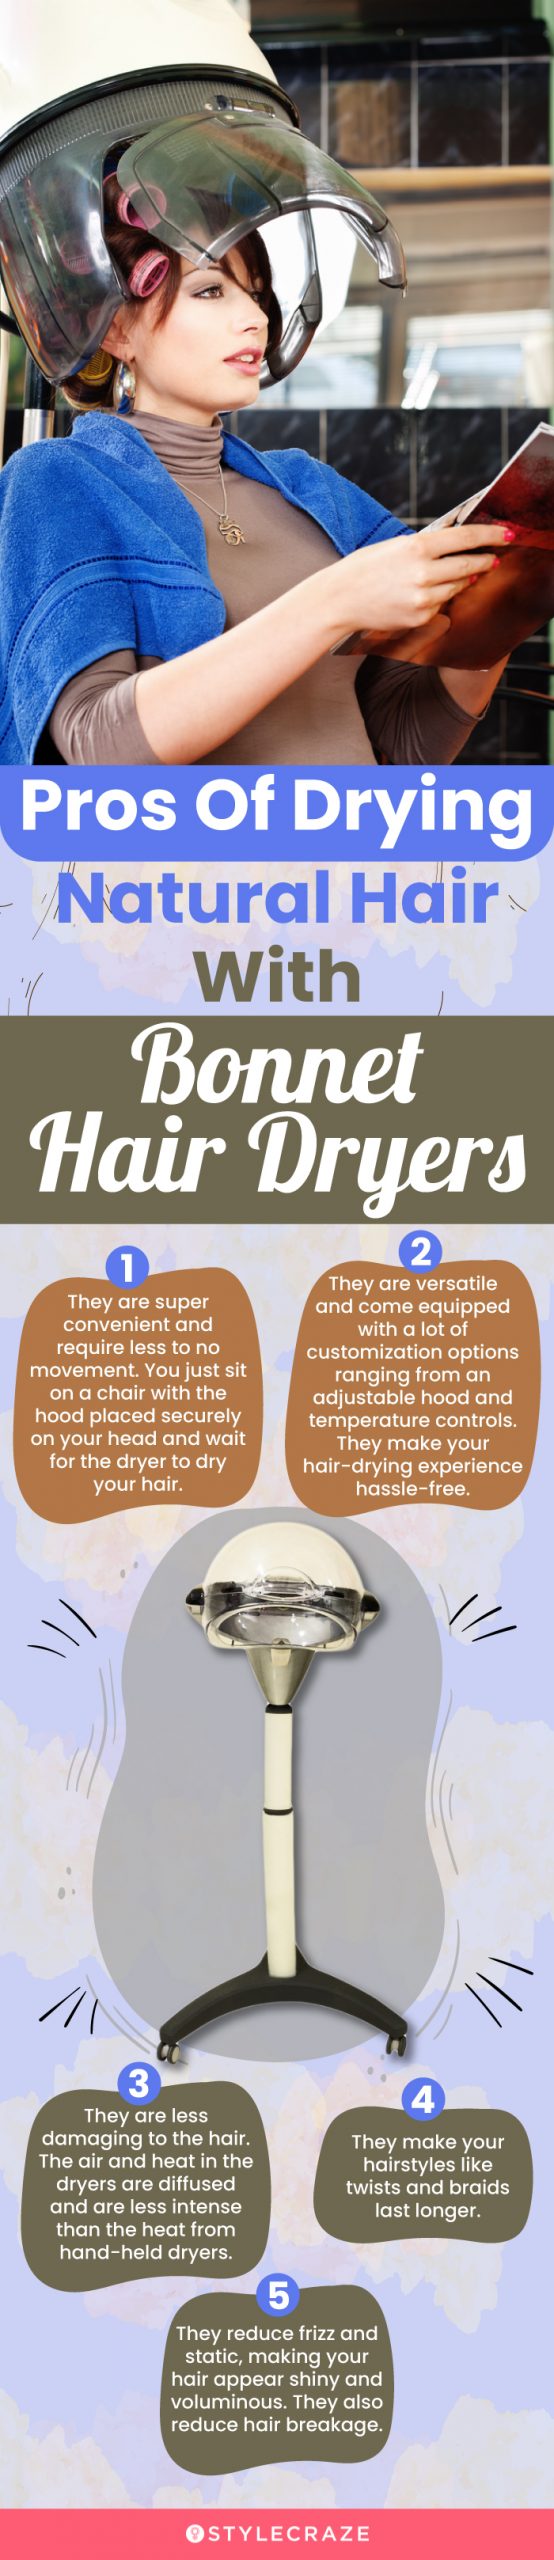 Pros Of Drying Natural Hair With Bonnet Hair Dryers(infographic)